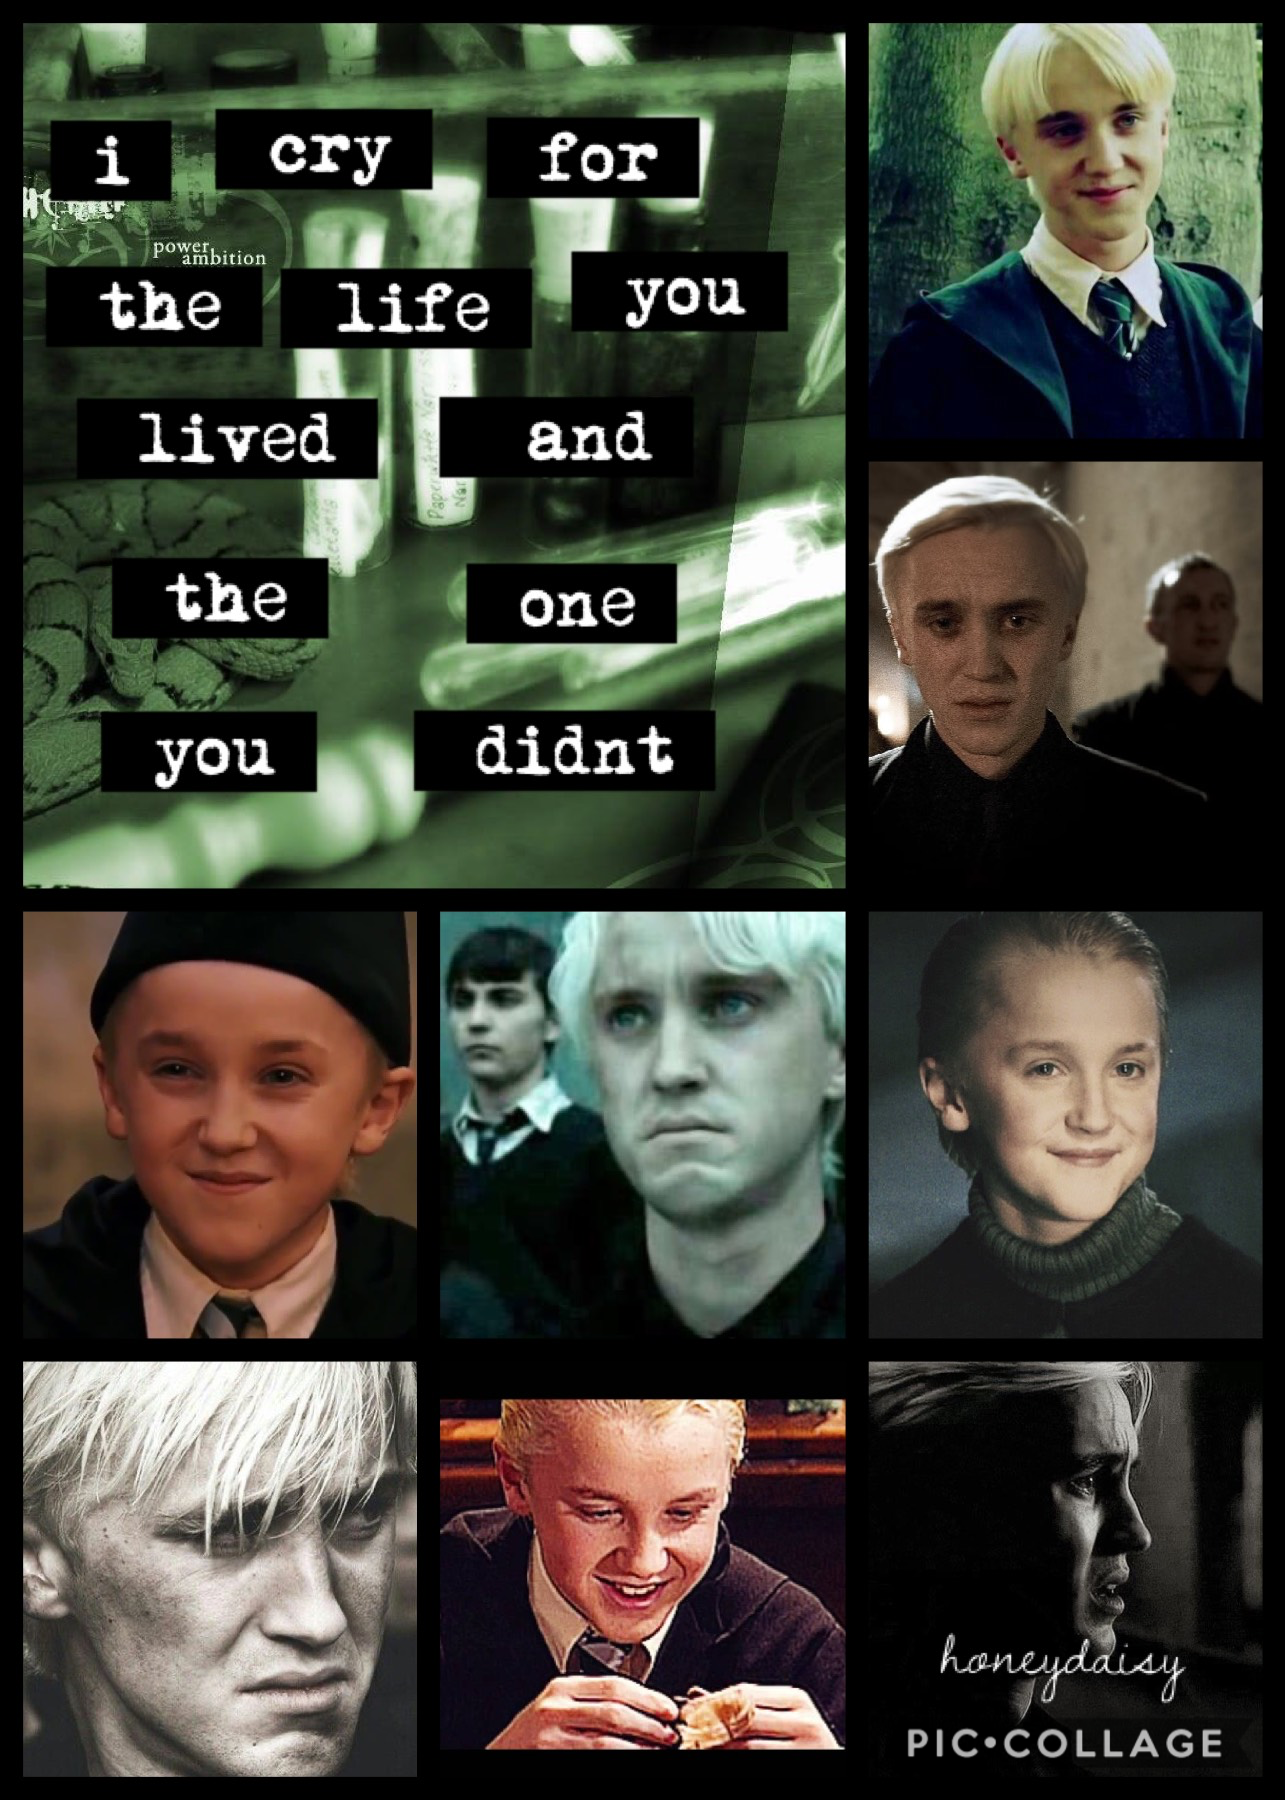 omg draco malfoy is my favorite harry potter character! 💚 who is yours? 